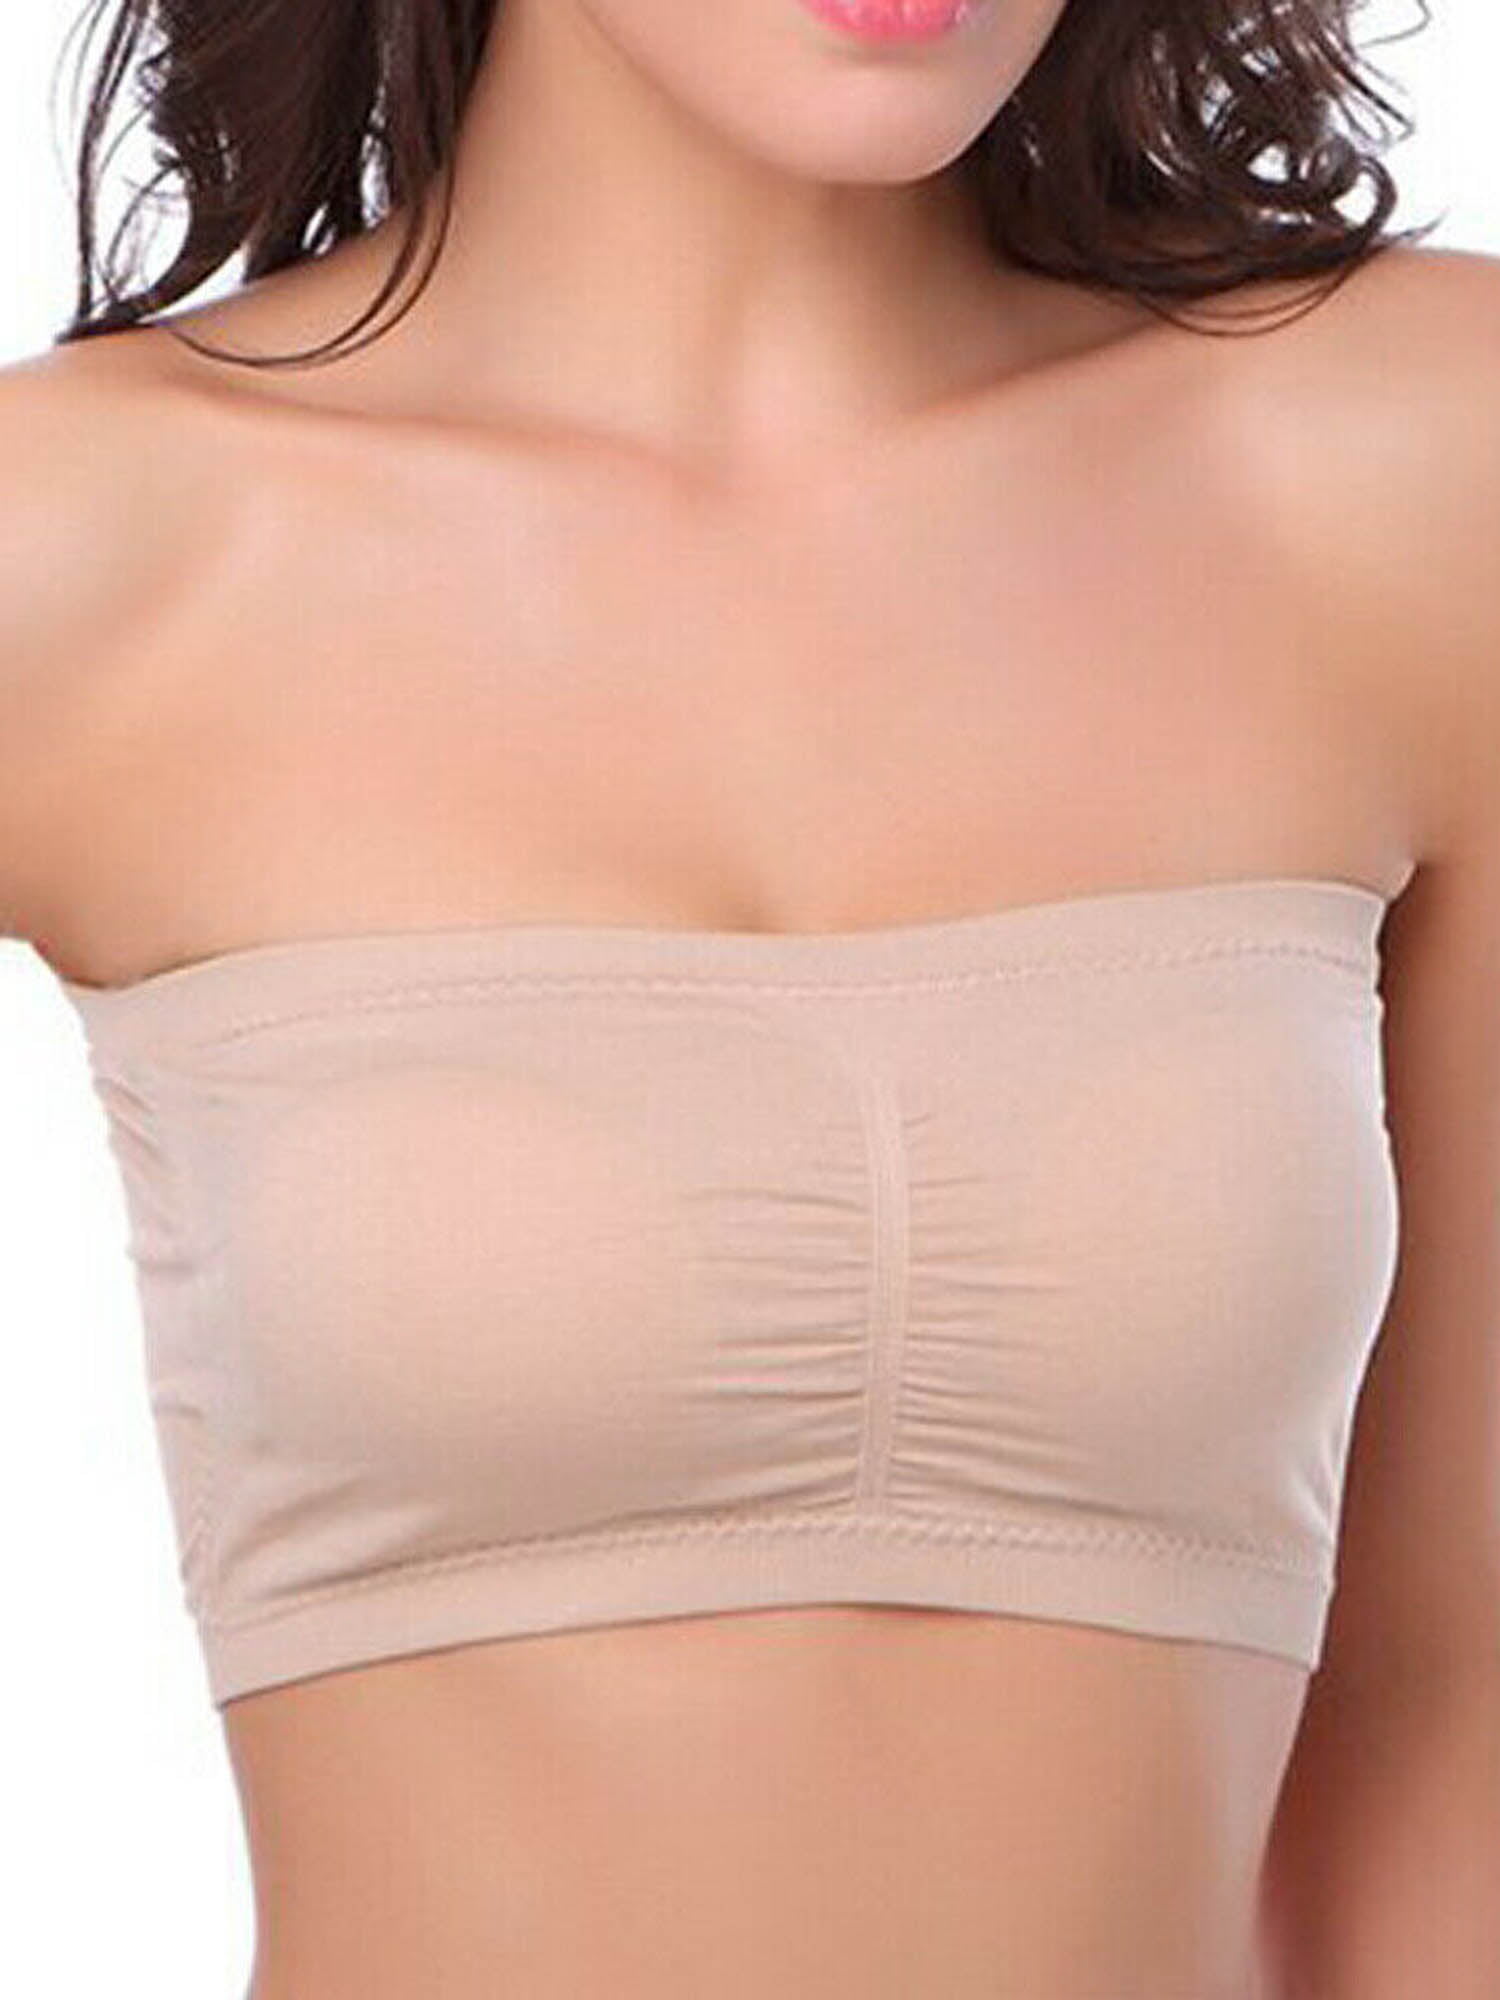 Double Layers Plus Size Strapless Bra Bandeau Tube Removable Padded Top  Stretchy Seamless Bandeau Bra Boob Crop Spaghetti Strap